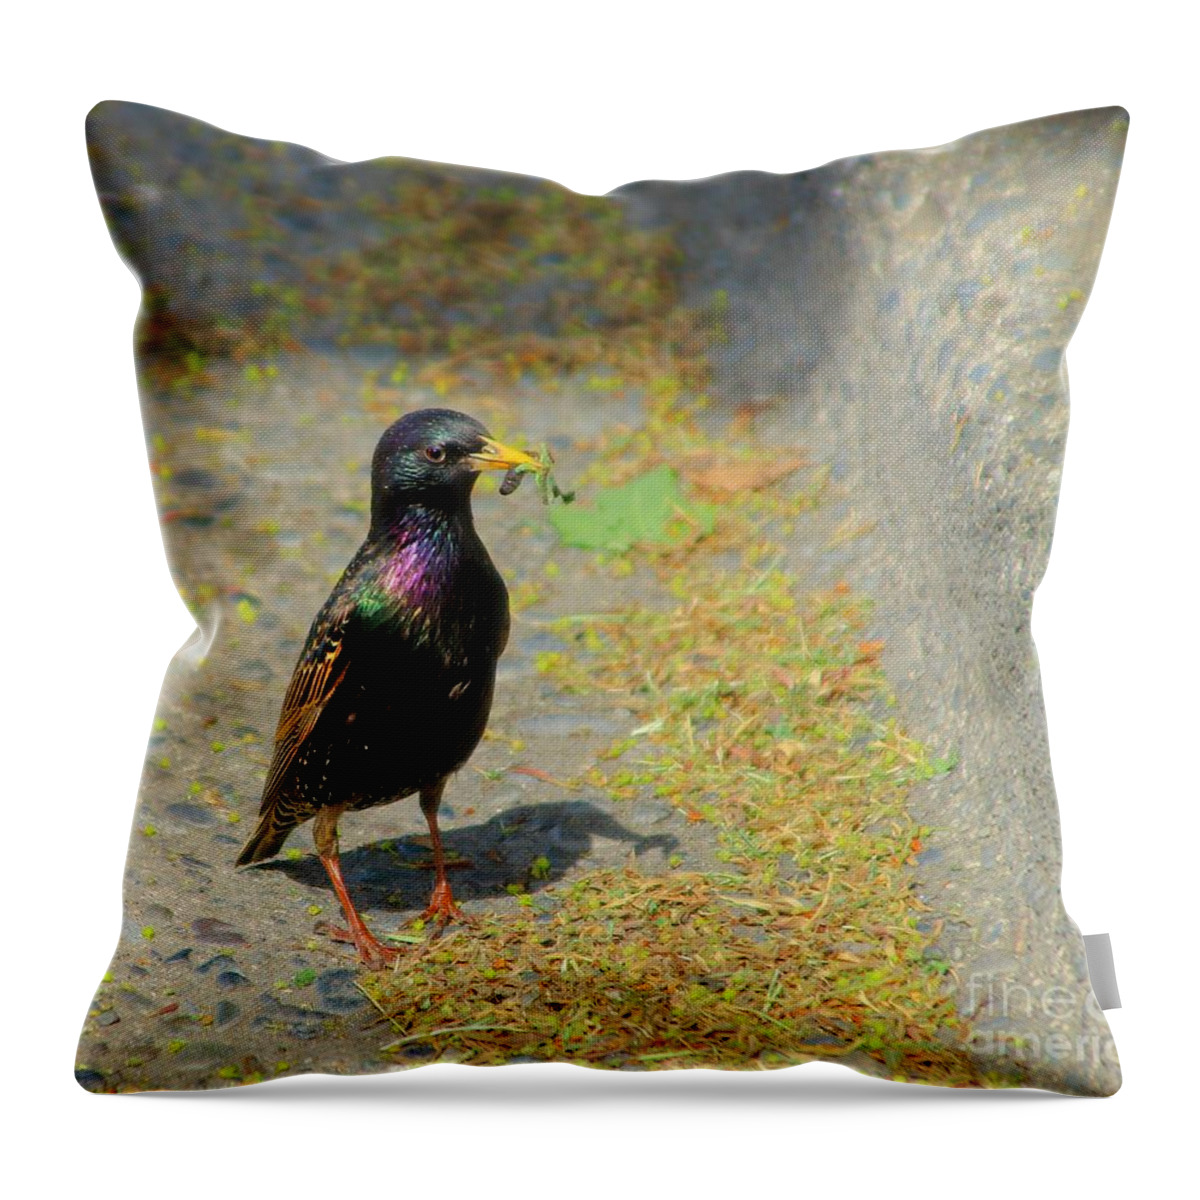 Starling Throw Pillow featuring the photograph Startled Starling by Kimberly Furey